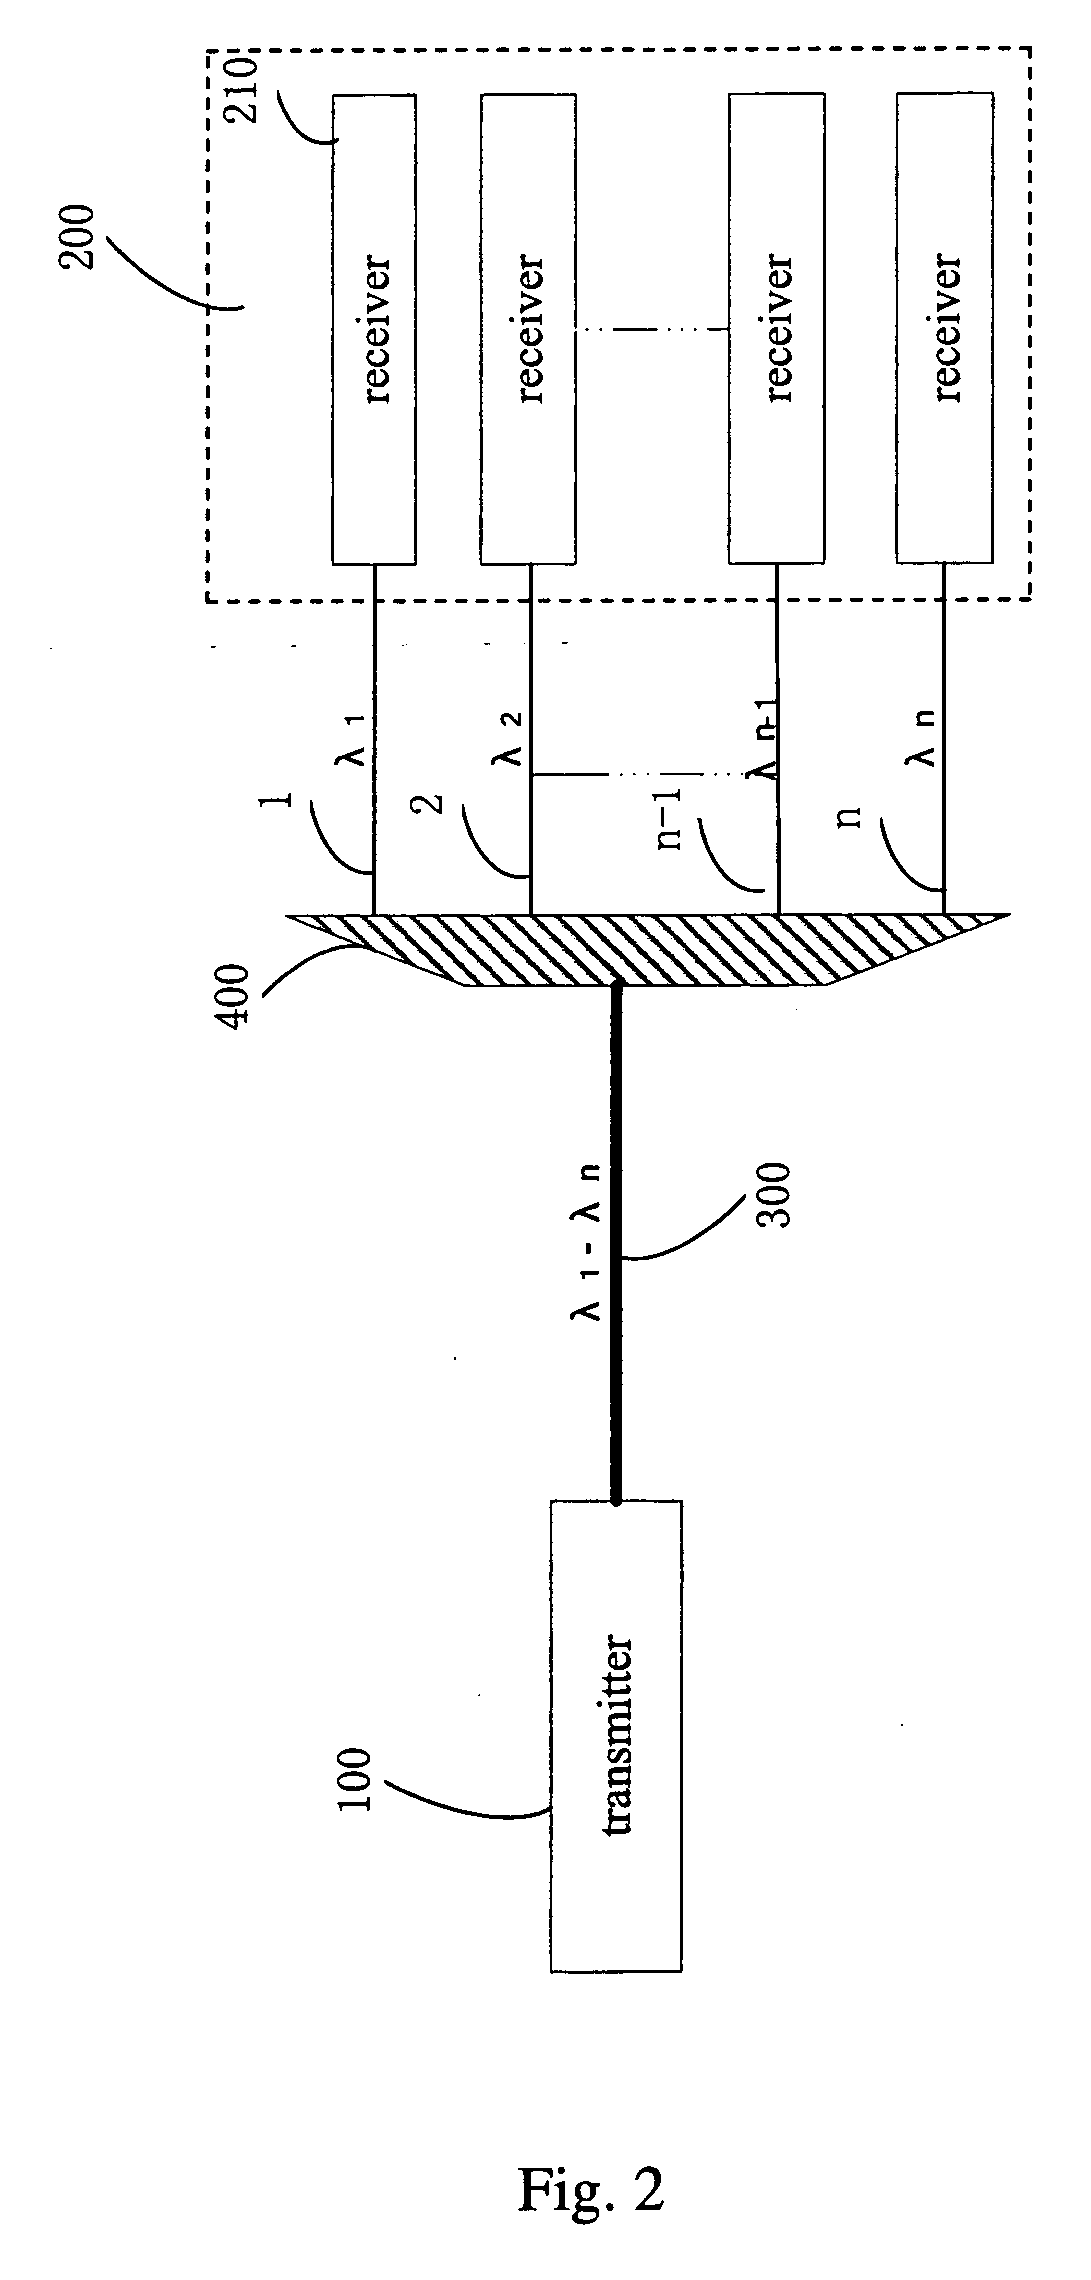 Methods and system for quantum key distribution over multi-user WDM network with wavelength routing